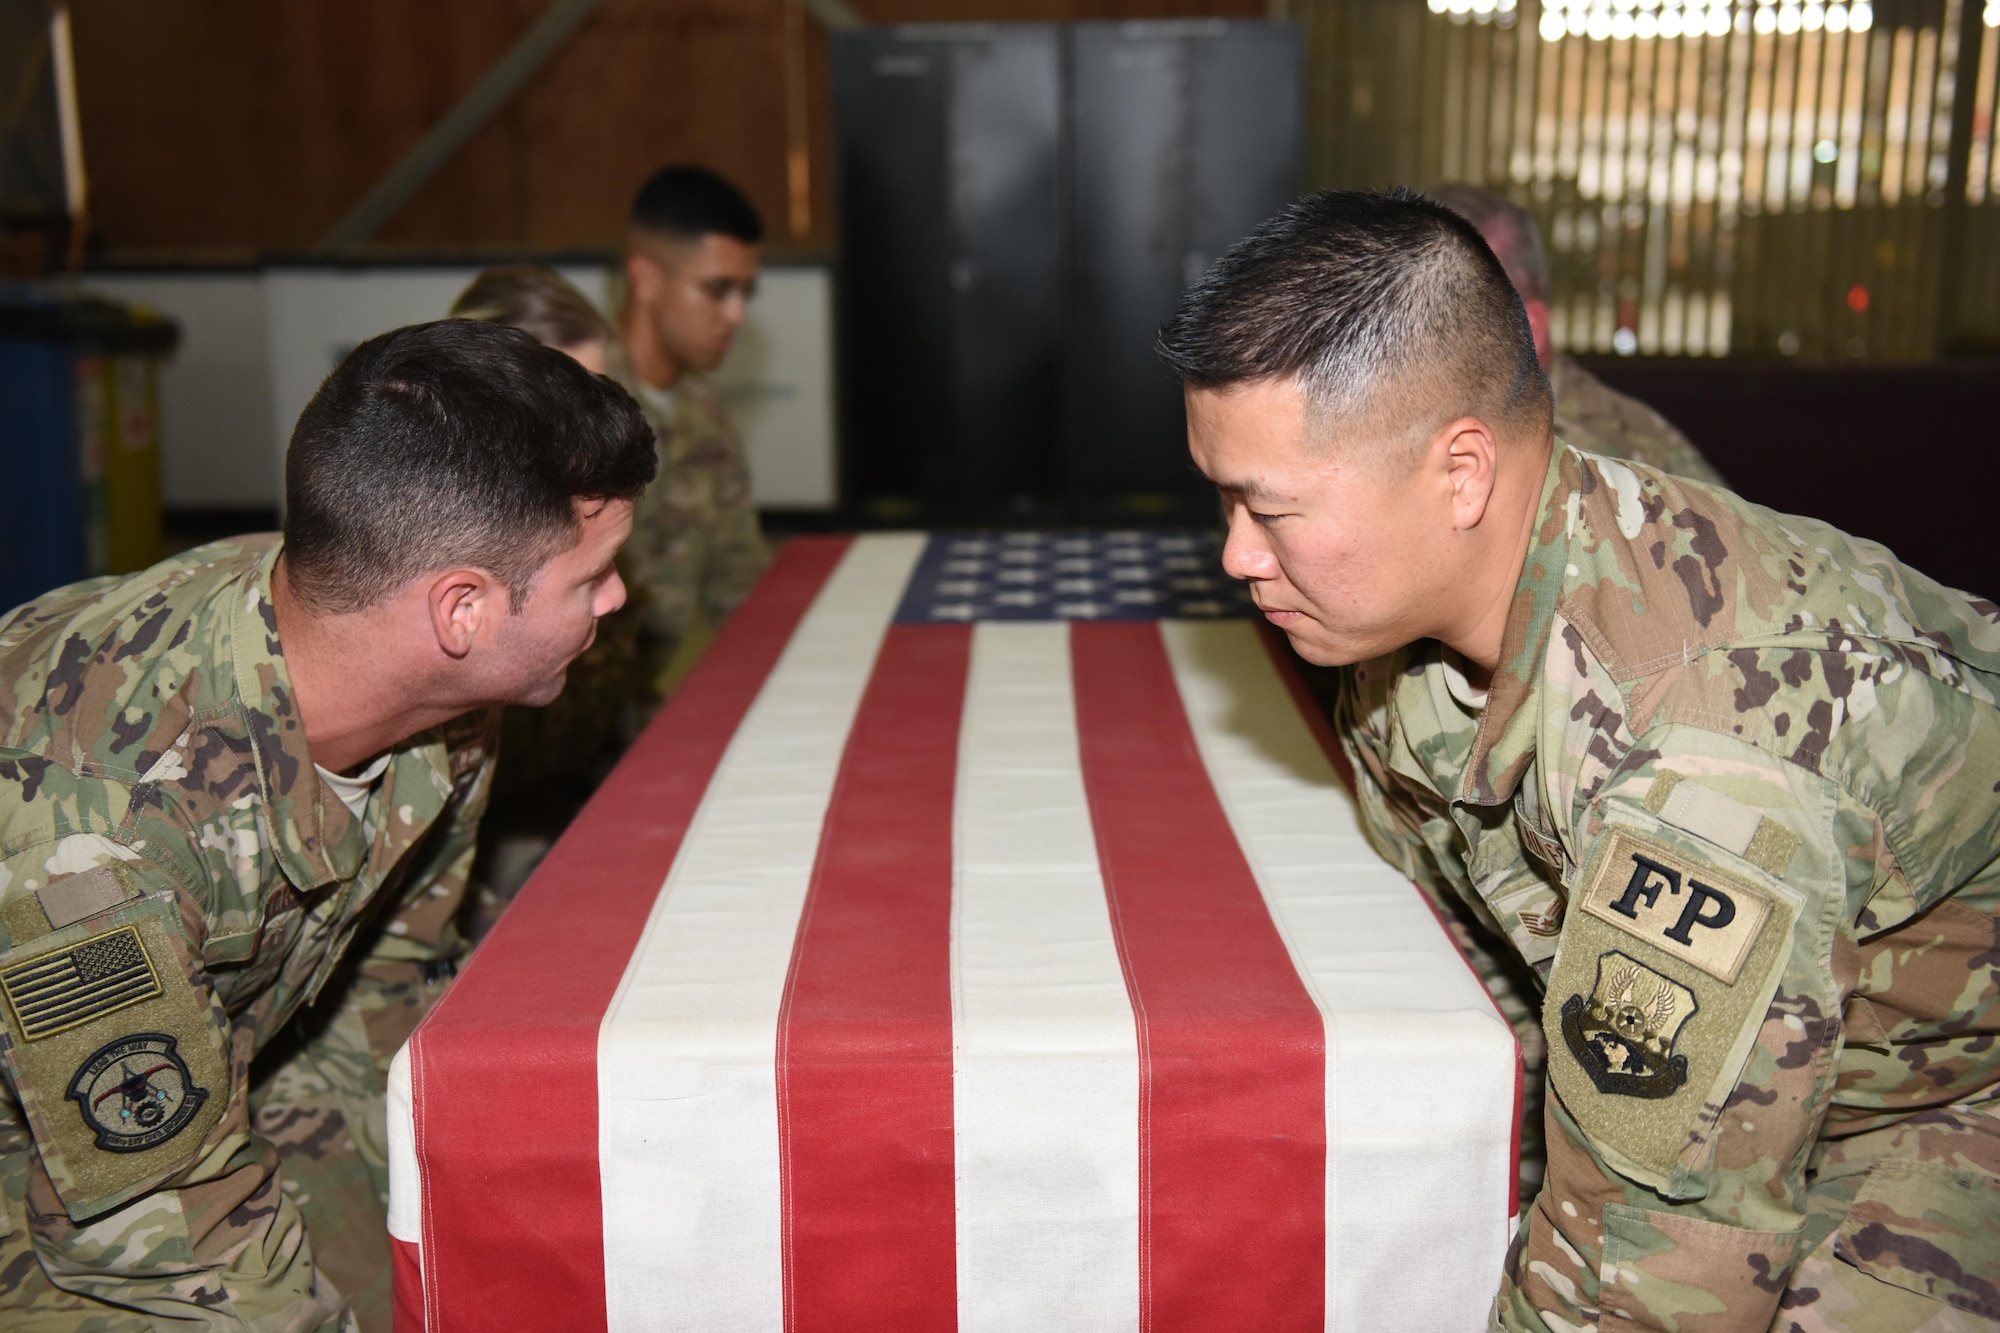 Tech. Sgt. David Yuen (right), a force protection member with the 387th Expeditionary Support Squadron, and other force protection and fire fighter members conduct a dignified transfer ceremony practice at an undisclosed location in Southwest Asia, June 22, 2017. The 387th Force Protection flight is responsible for providing dignified transfers to a theater mortuary evacuation point ran by the U.S. Army. (U.S. Air Force photo/Tech. Sgt. Jonathan Hehnly)